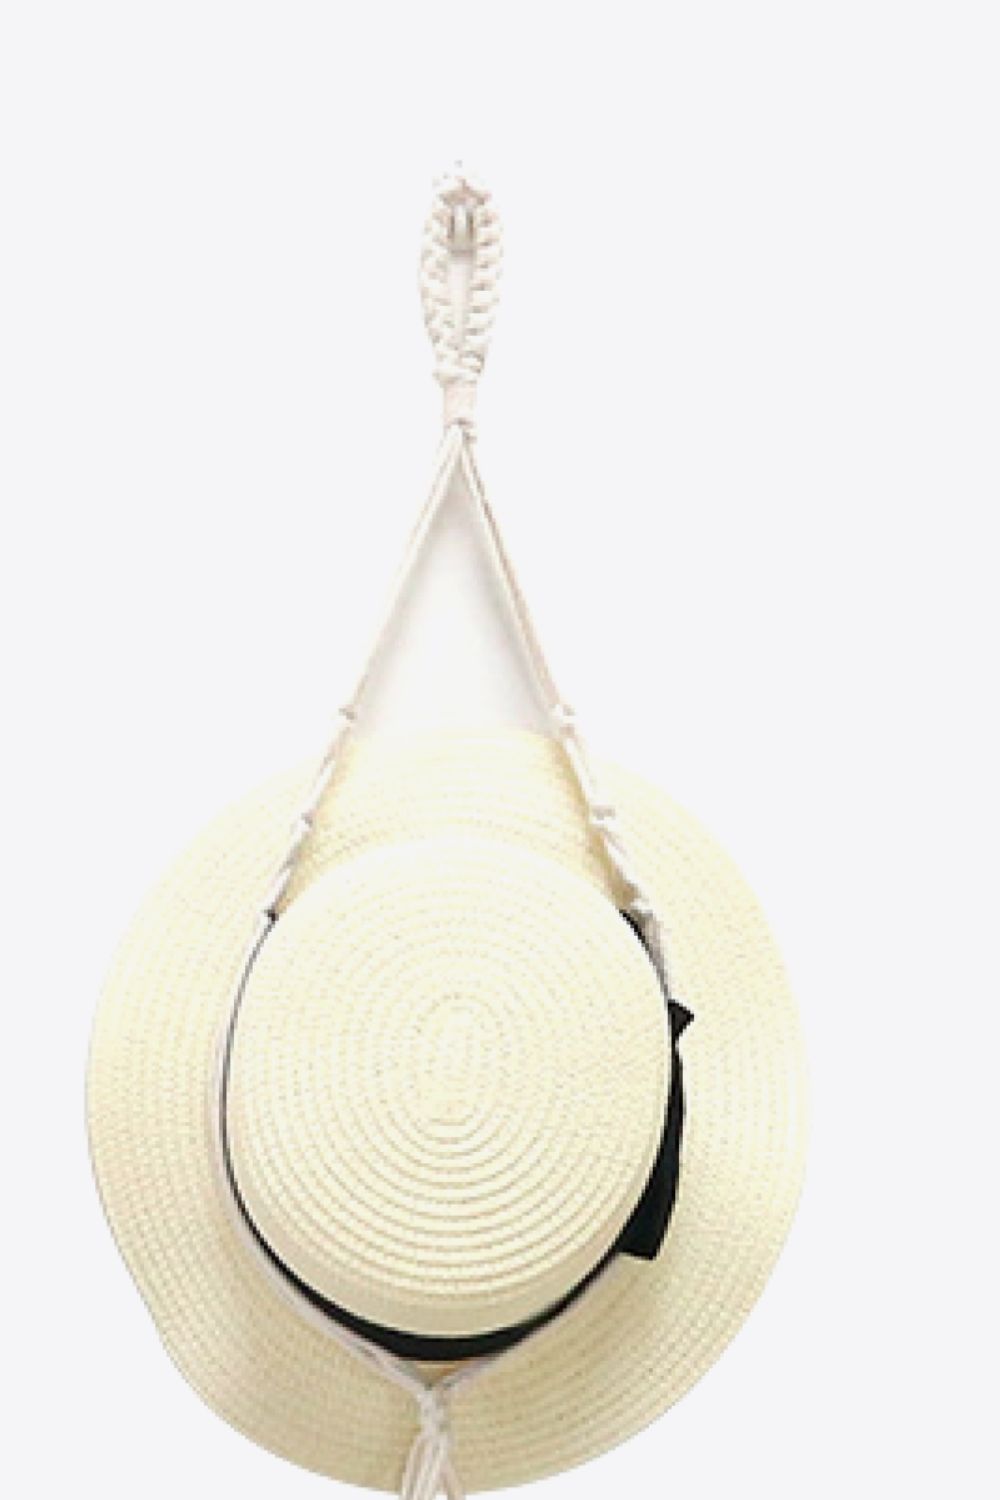 Macrame Hat Hanger Print on any thing USA/STOD clothes